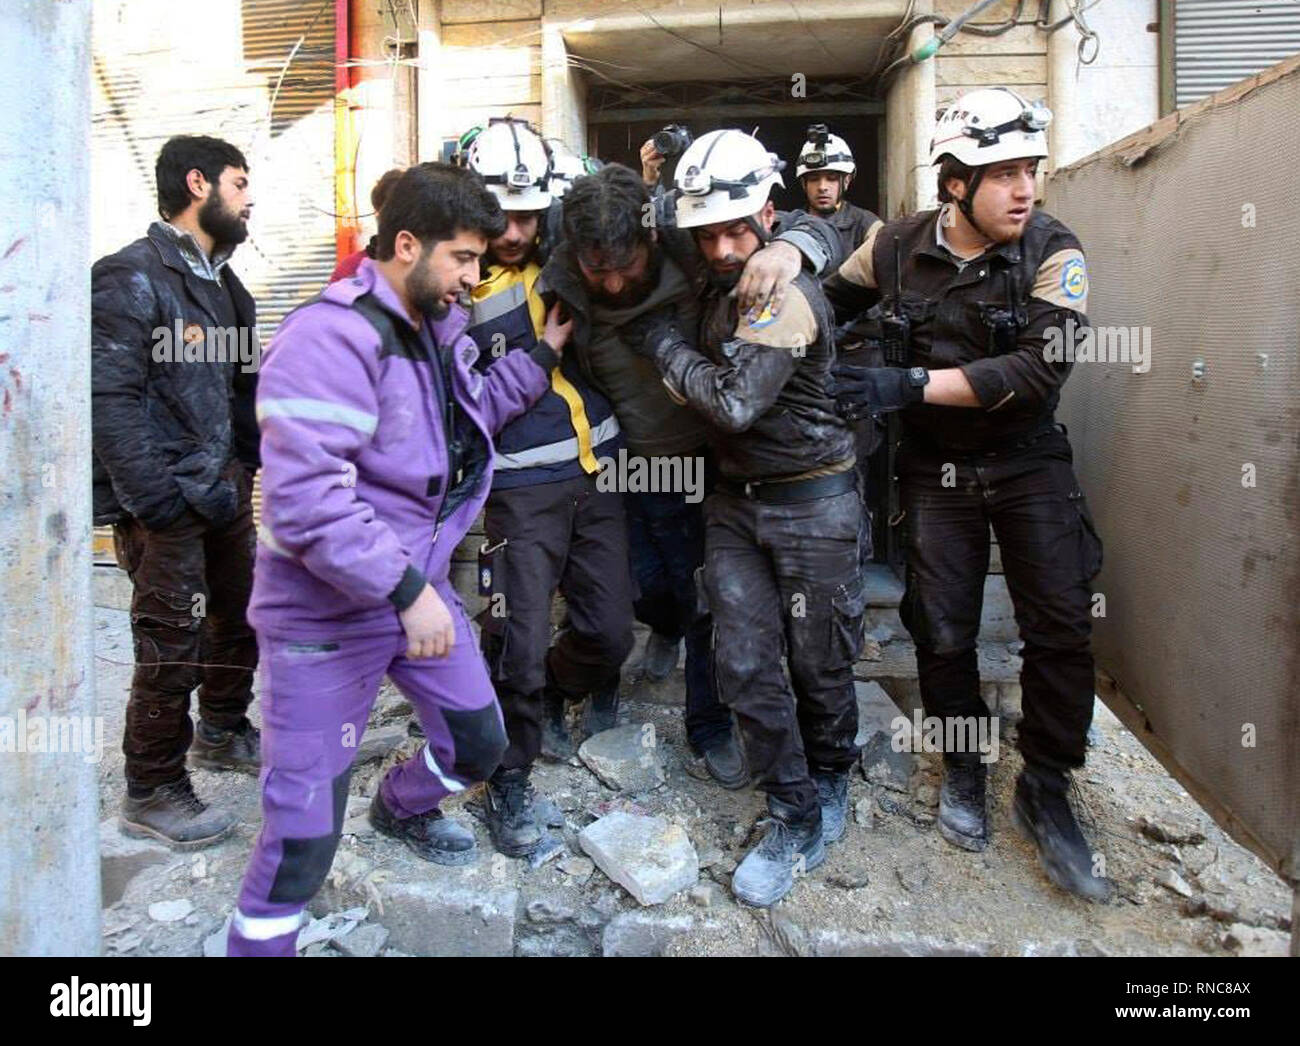 This photo released on Monday, Feb. 18, 2019 by the Syrian Civil Defense group known as the White Helmets, shows Syrian White Helmet civil defense workers carrying an injured man from a building hit by a shell from Syrian forces, in the town of Maaret al-Numan, Idlib, north Syria. Syrian government forces shelled areas held by insurgents, on Monday, in the latest violation of a September truce reached between Russia and Turkey that averted a wide government offensive on the last major rebel stronghold in Idlib province. (Syrian Civil Defense White Helmets via AP) Stock Photo